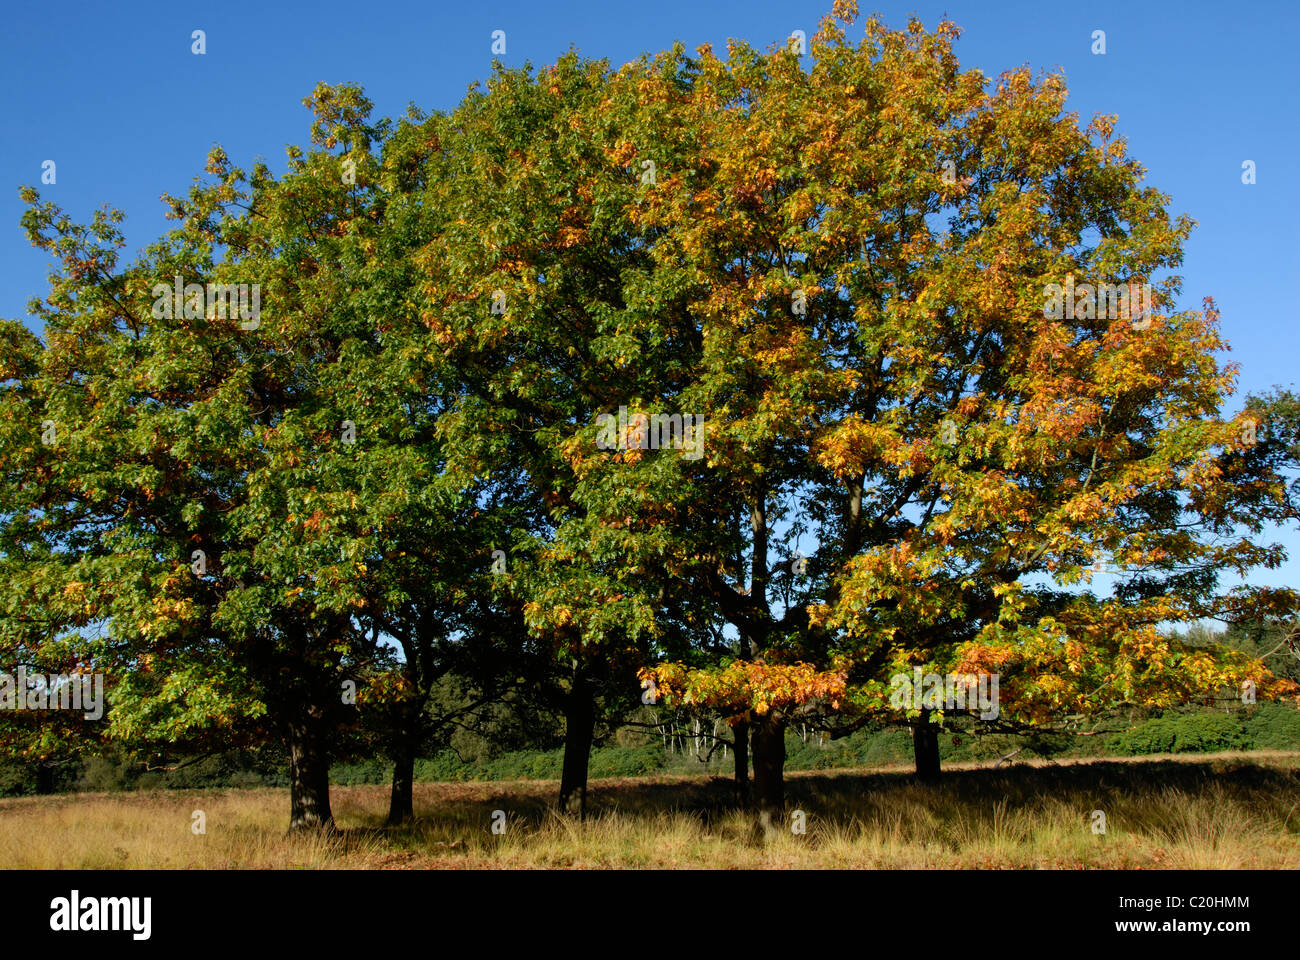 Oak trees in Richmond Park just turning to their Autumn colours  London, UK October 2008 Stock Photo